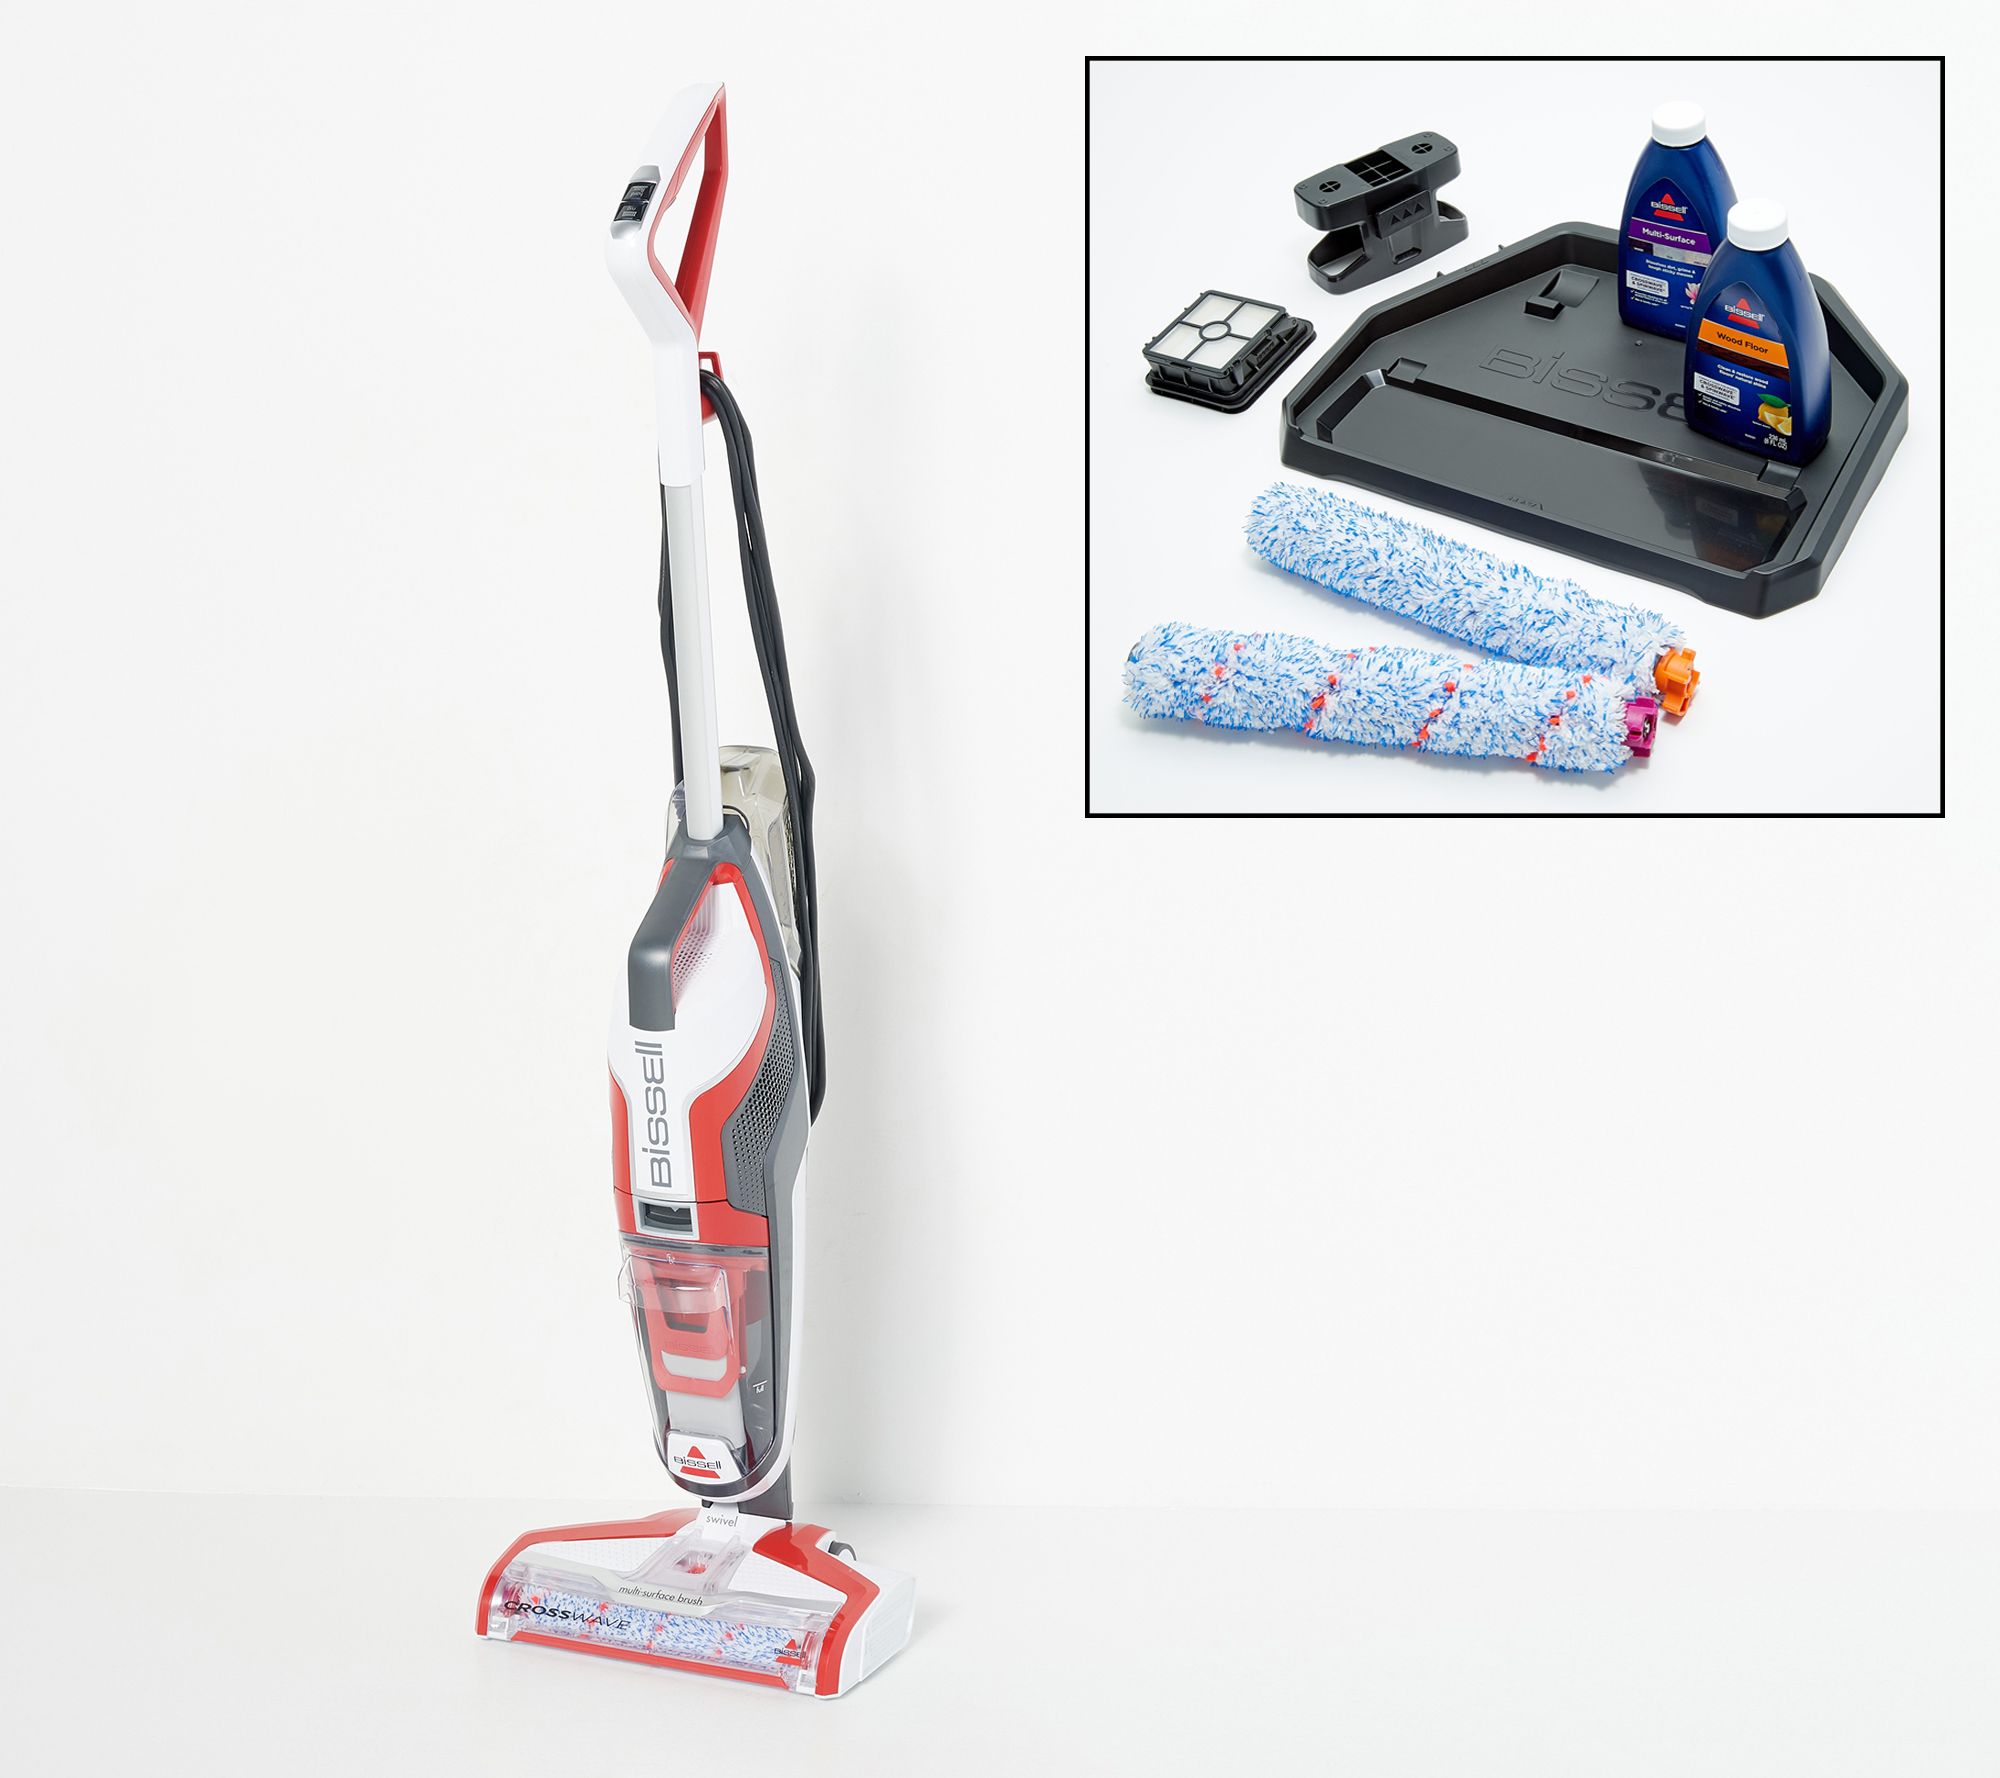 Bissell CrossWave Multi-Surface Cleaning System Review